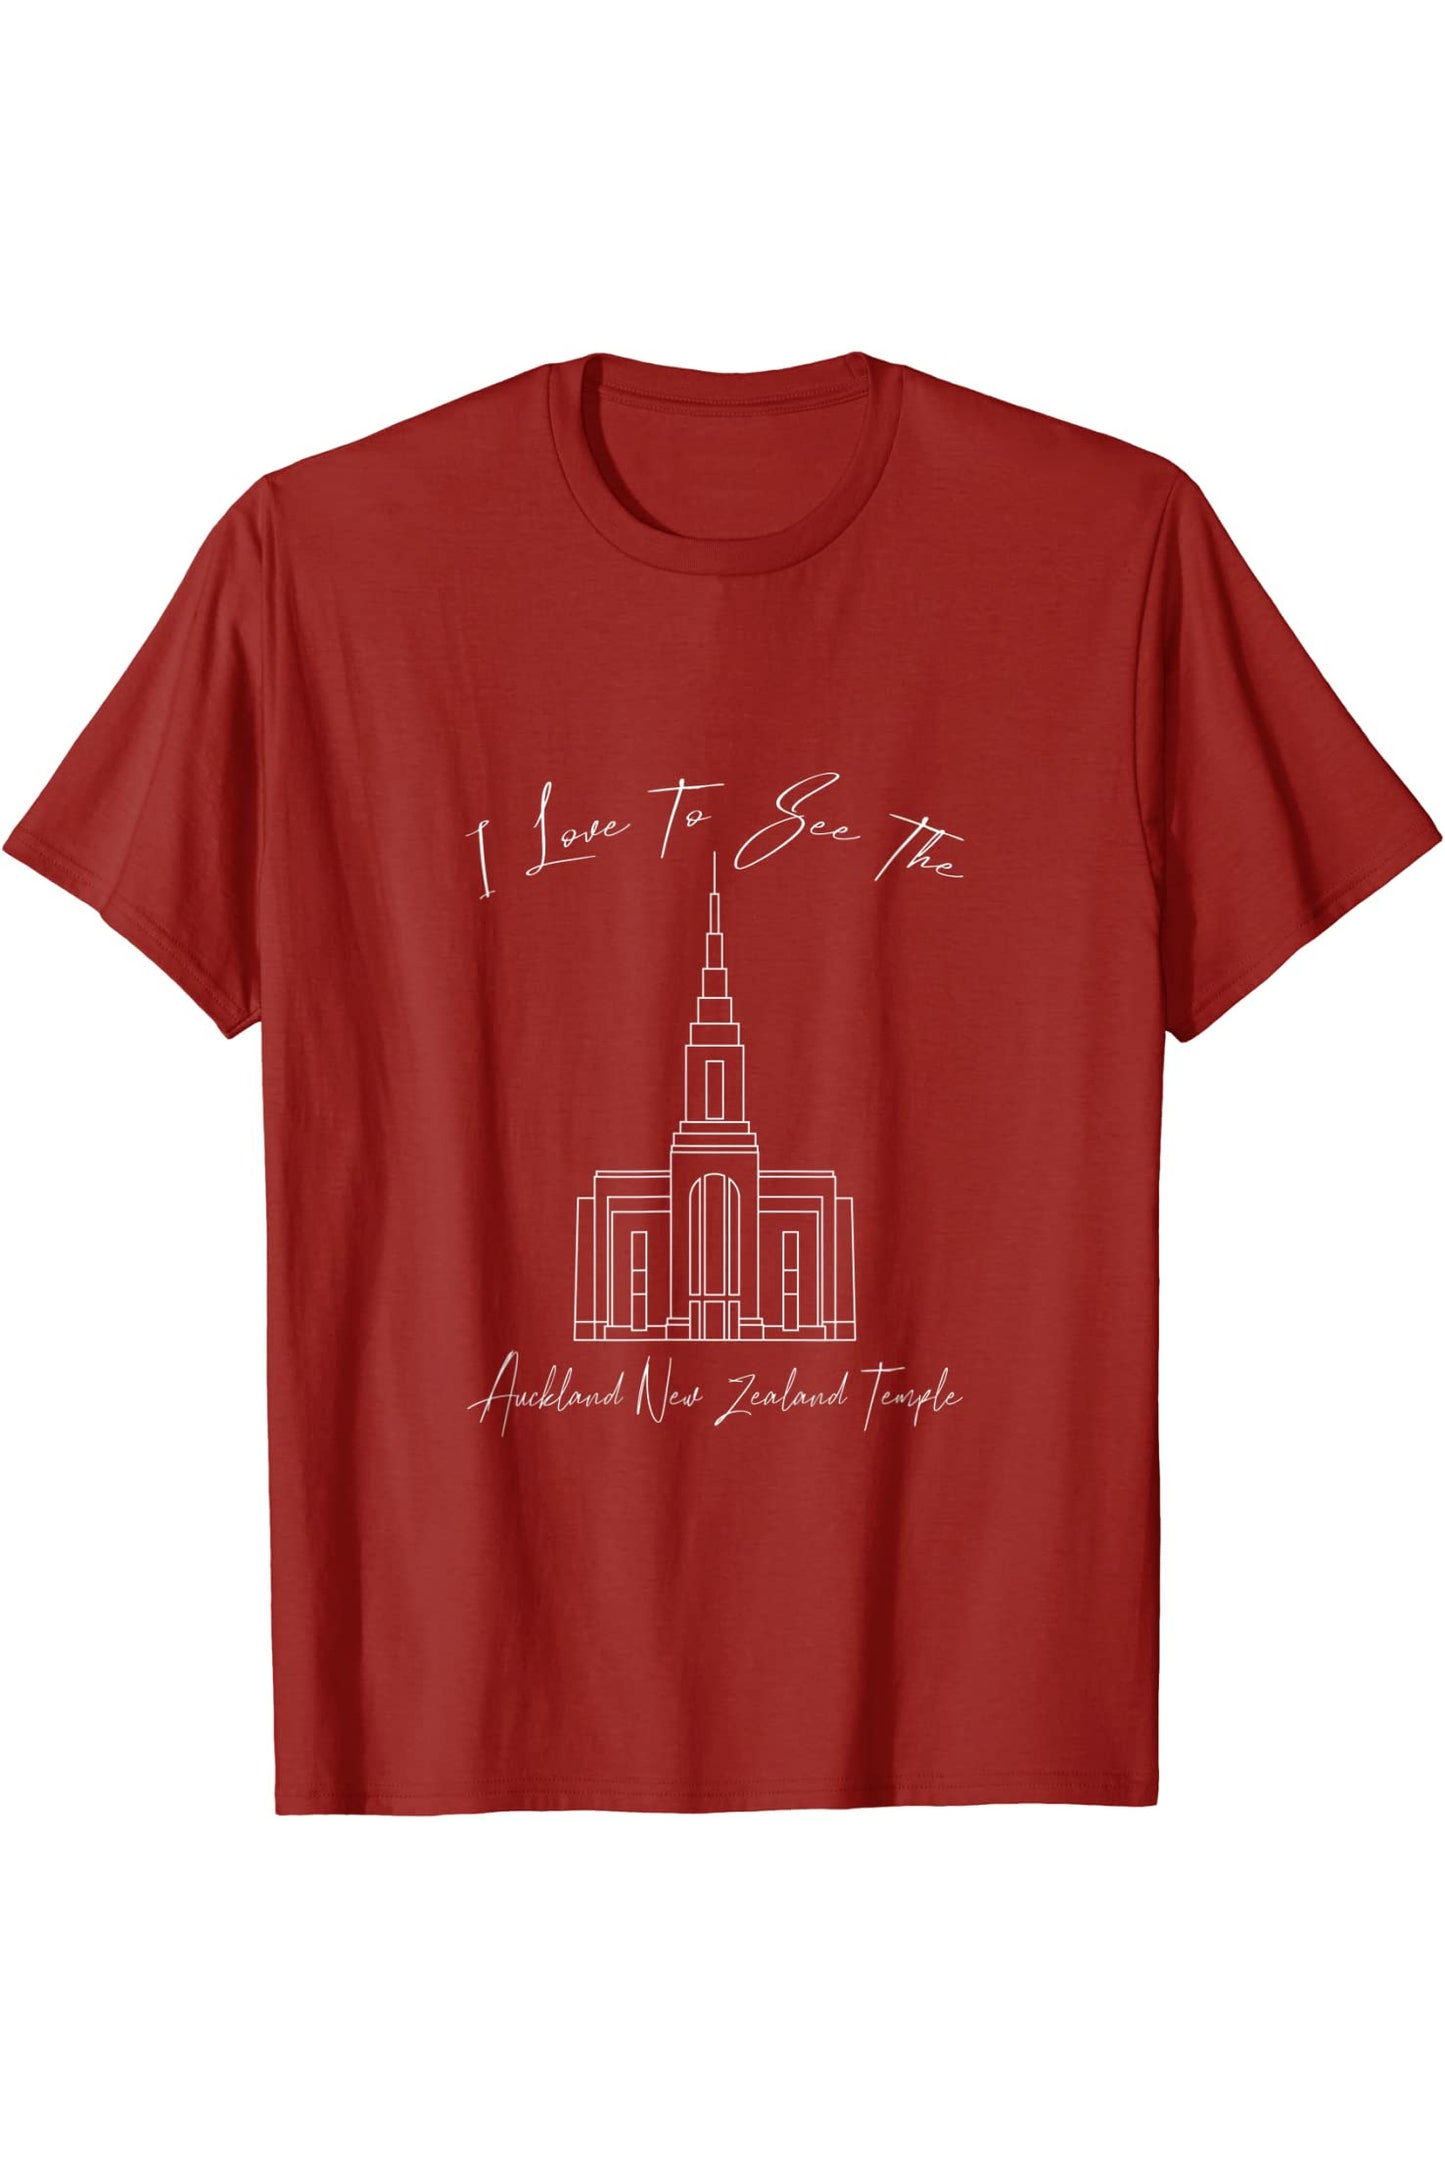 Auckland New Zealand Temple T-Shirt - Calligraphy Style (English) US